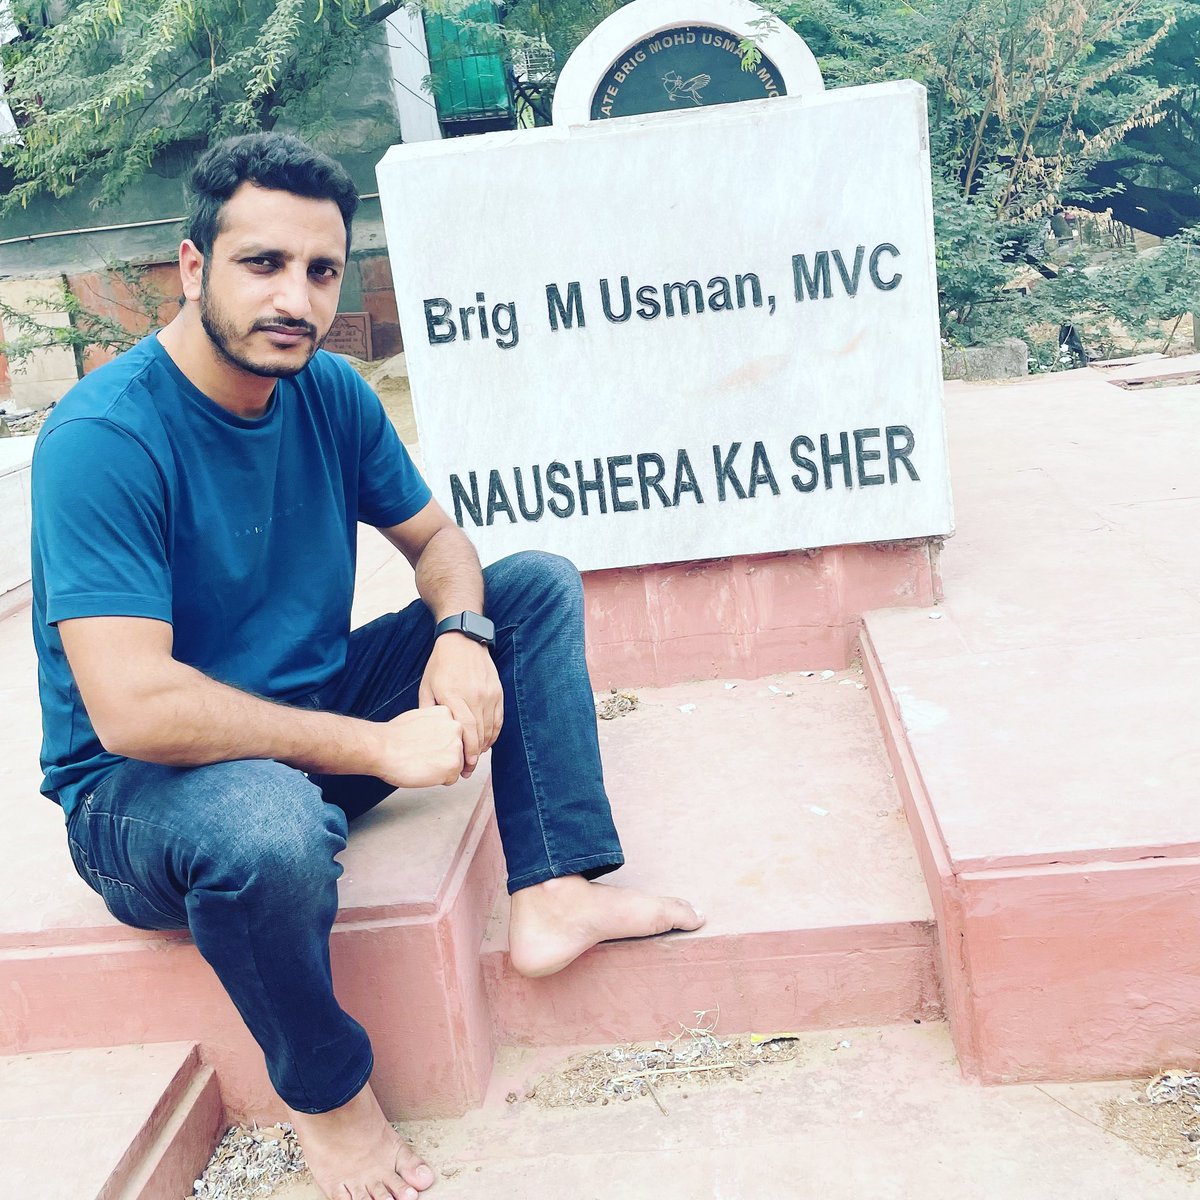 The #BattleofNaushera was a major victory for #IndianArmy. The heroics of #NausheraKaSher Brigadier Usman, MVC & the gallant action of  Naik Jadunath Singh, PVC made 06 Feb 1948 a #RedLetterDay in the history of #IndianArmy.
At his grave yard .